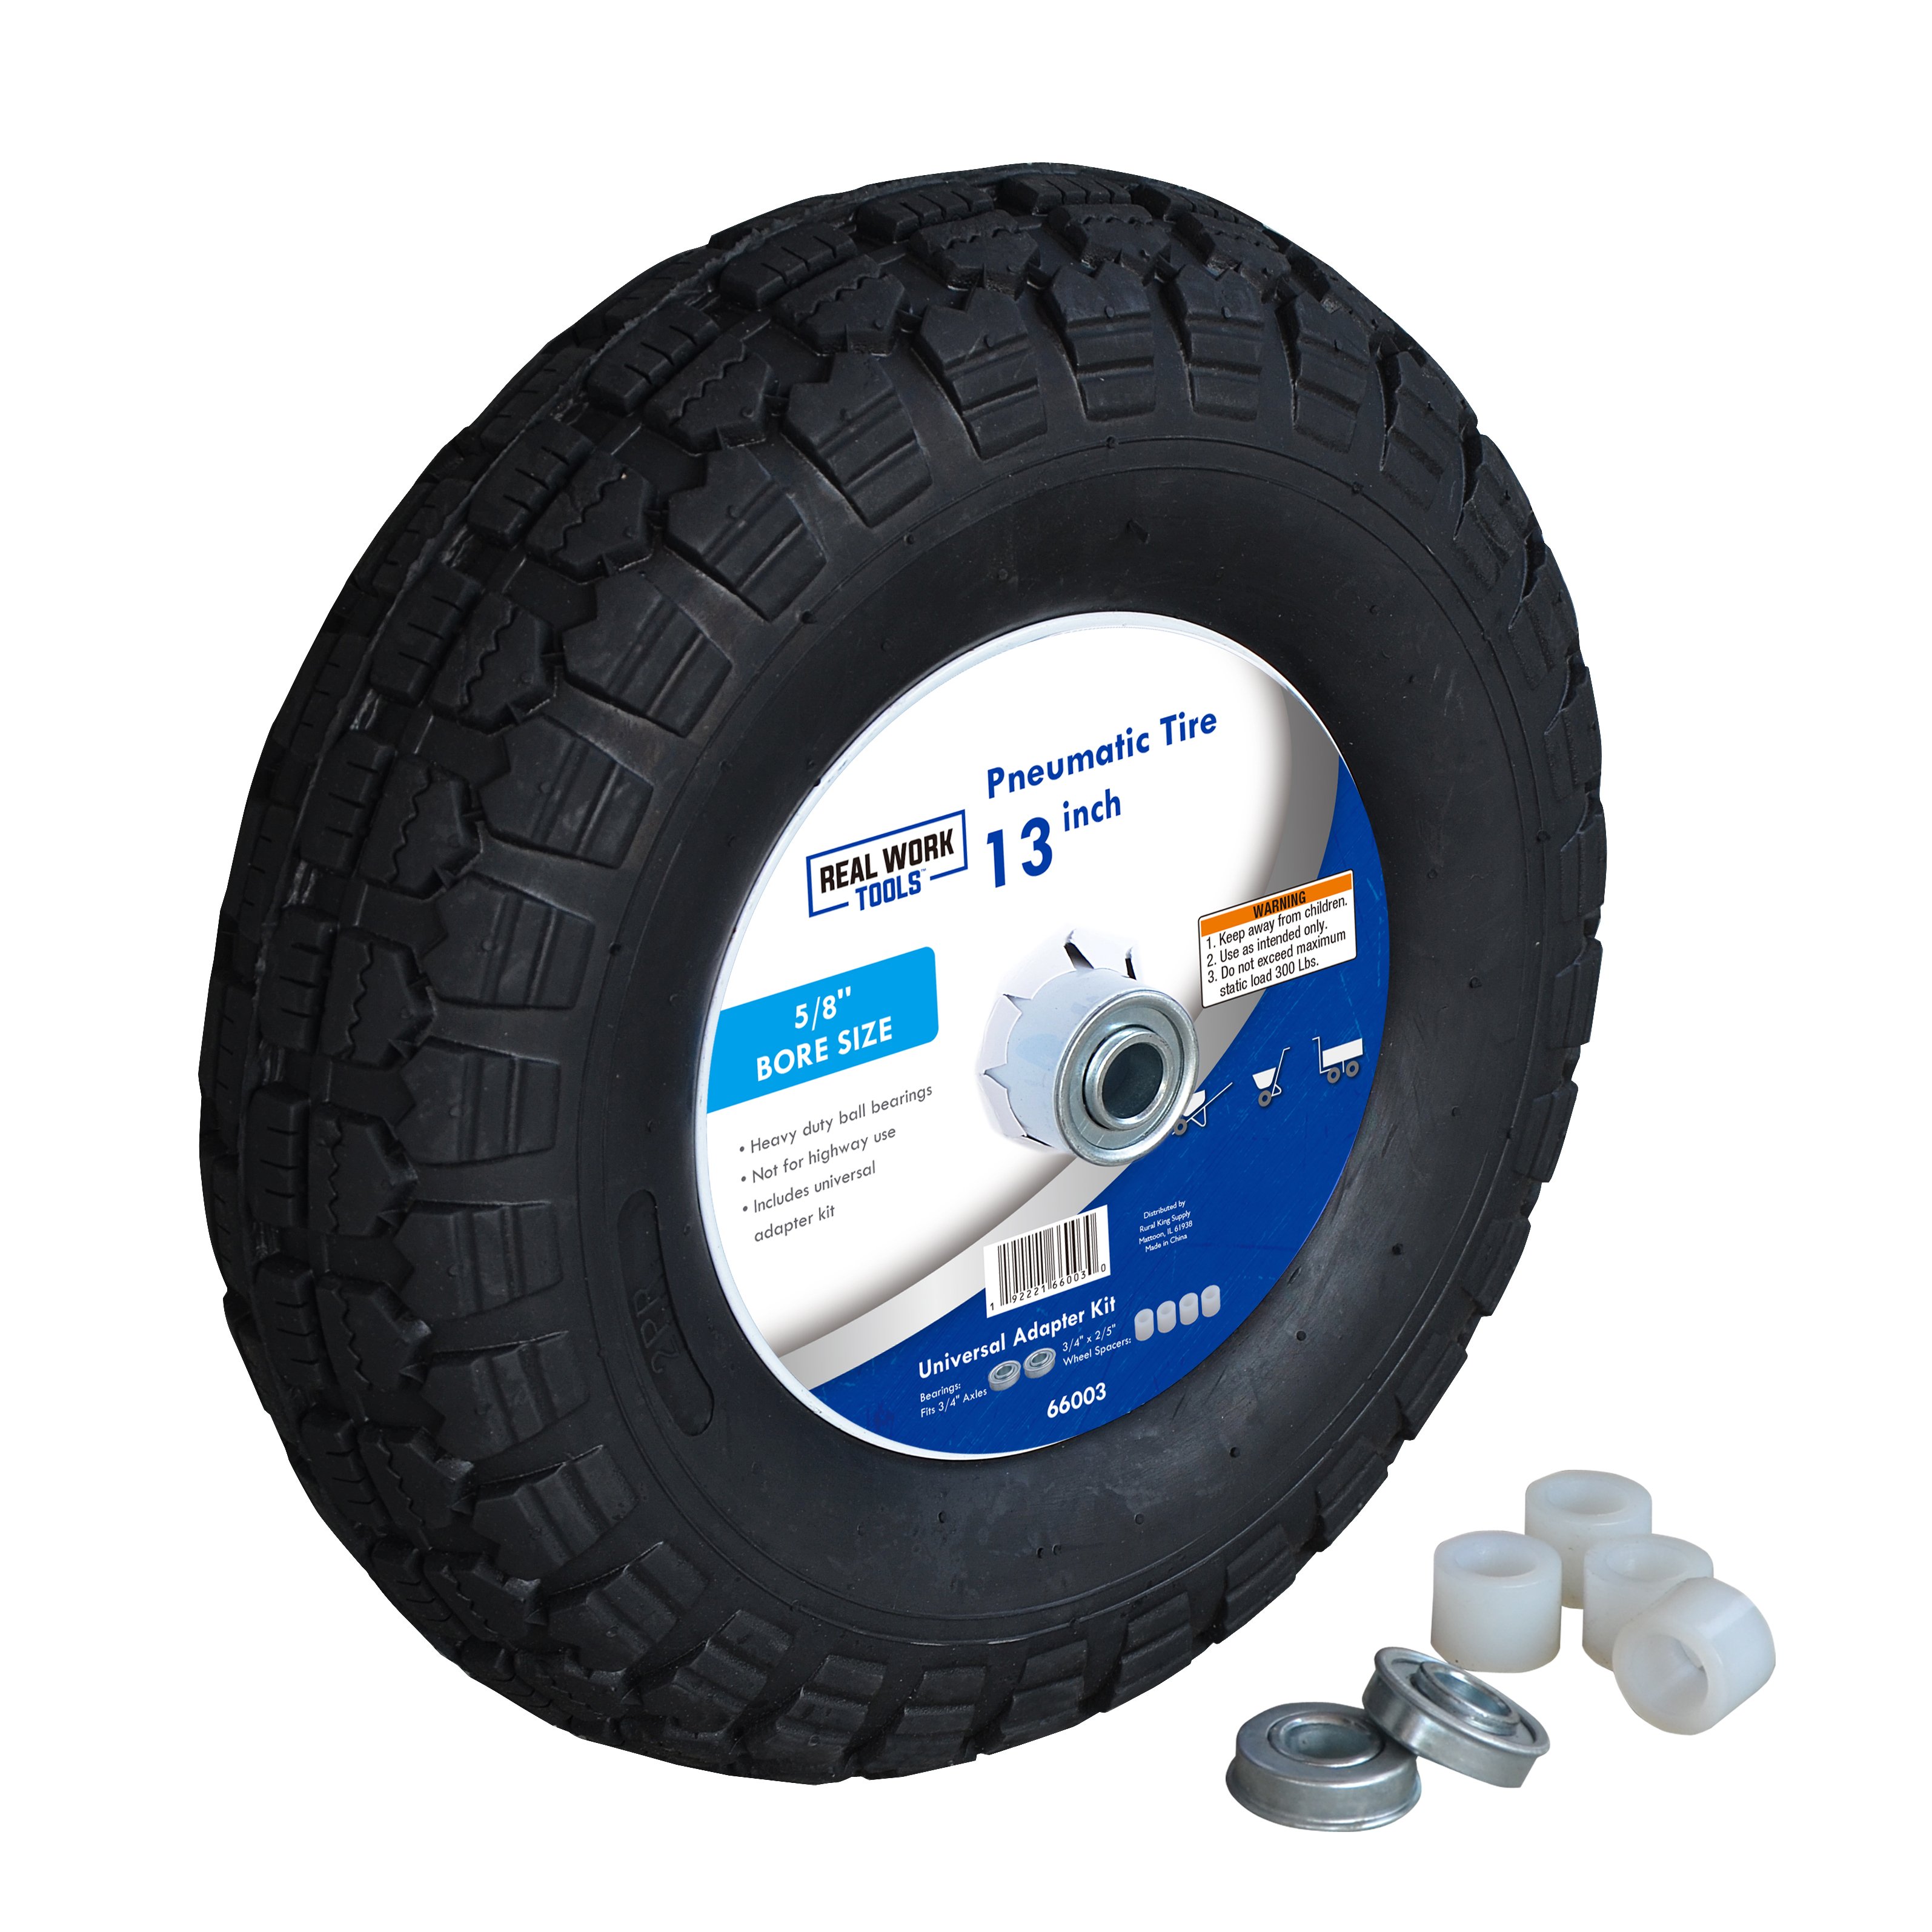 13 Inch Pneumatic Tire with Universal Bearing Kit - 66003